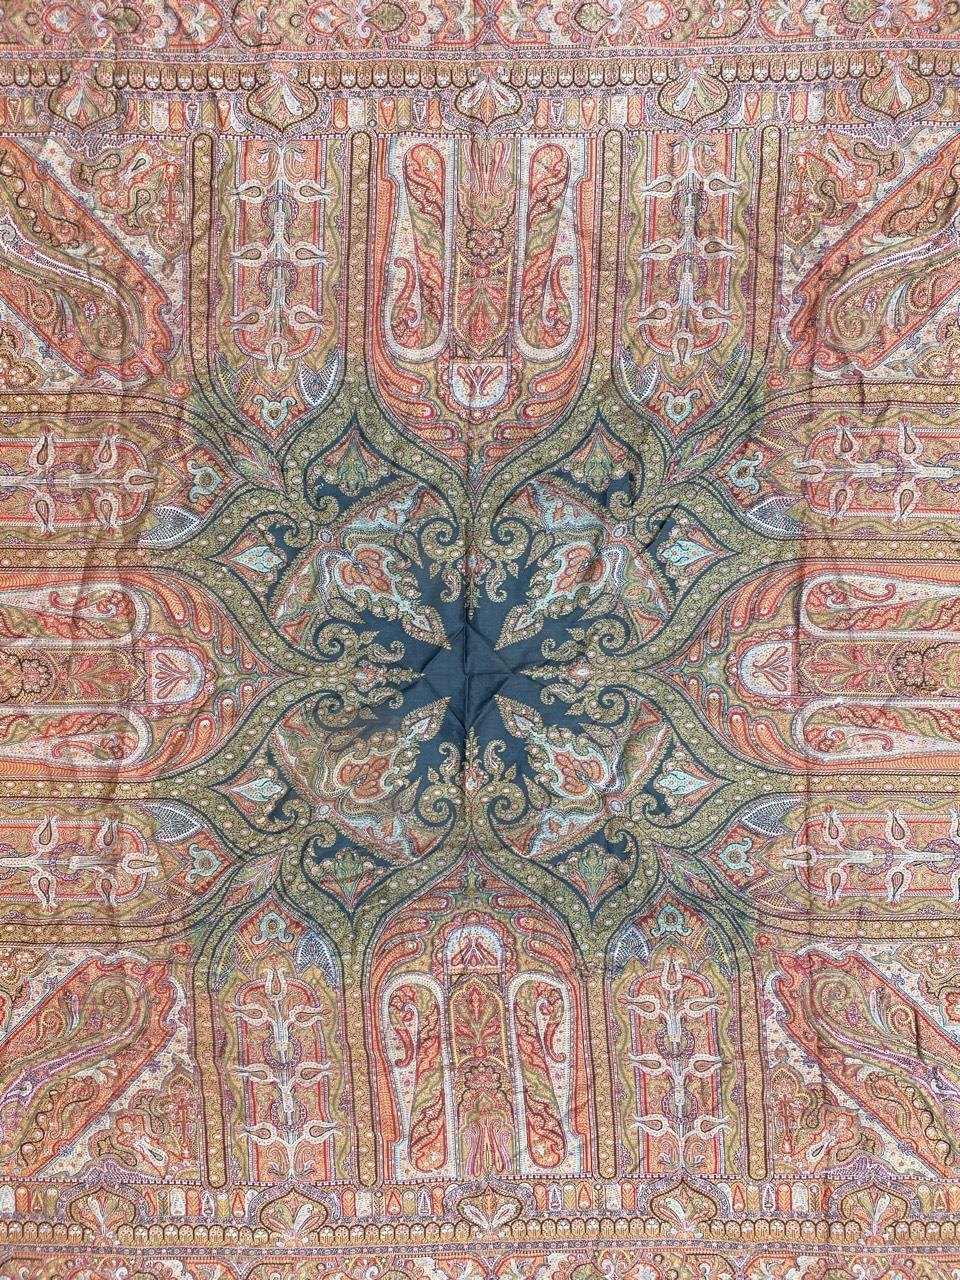 Nice late 19th century Kashmir of Lyon Shawl with a nice floral design and beautiful colors, very decorative, entirely woven by the Jaquar manufacturing, with wool on wool.